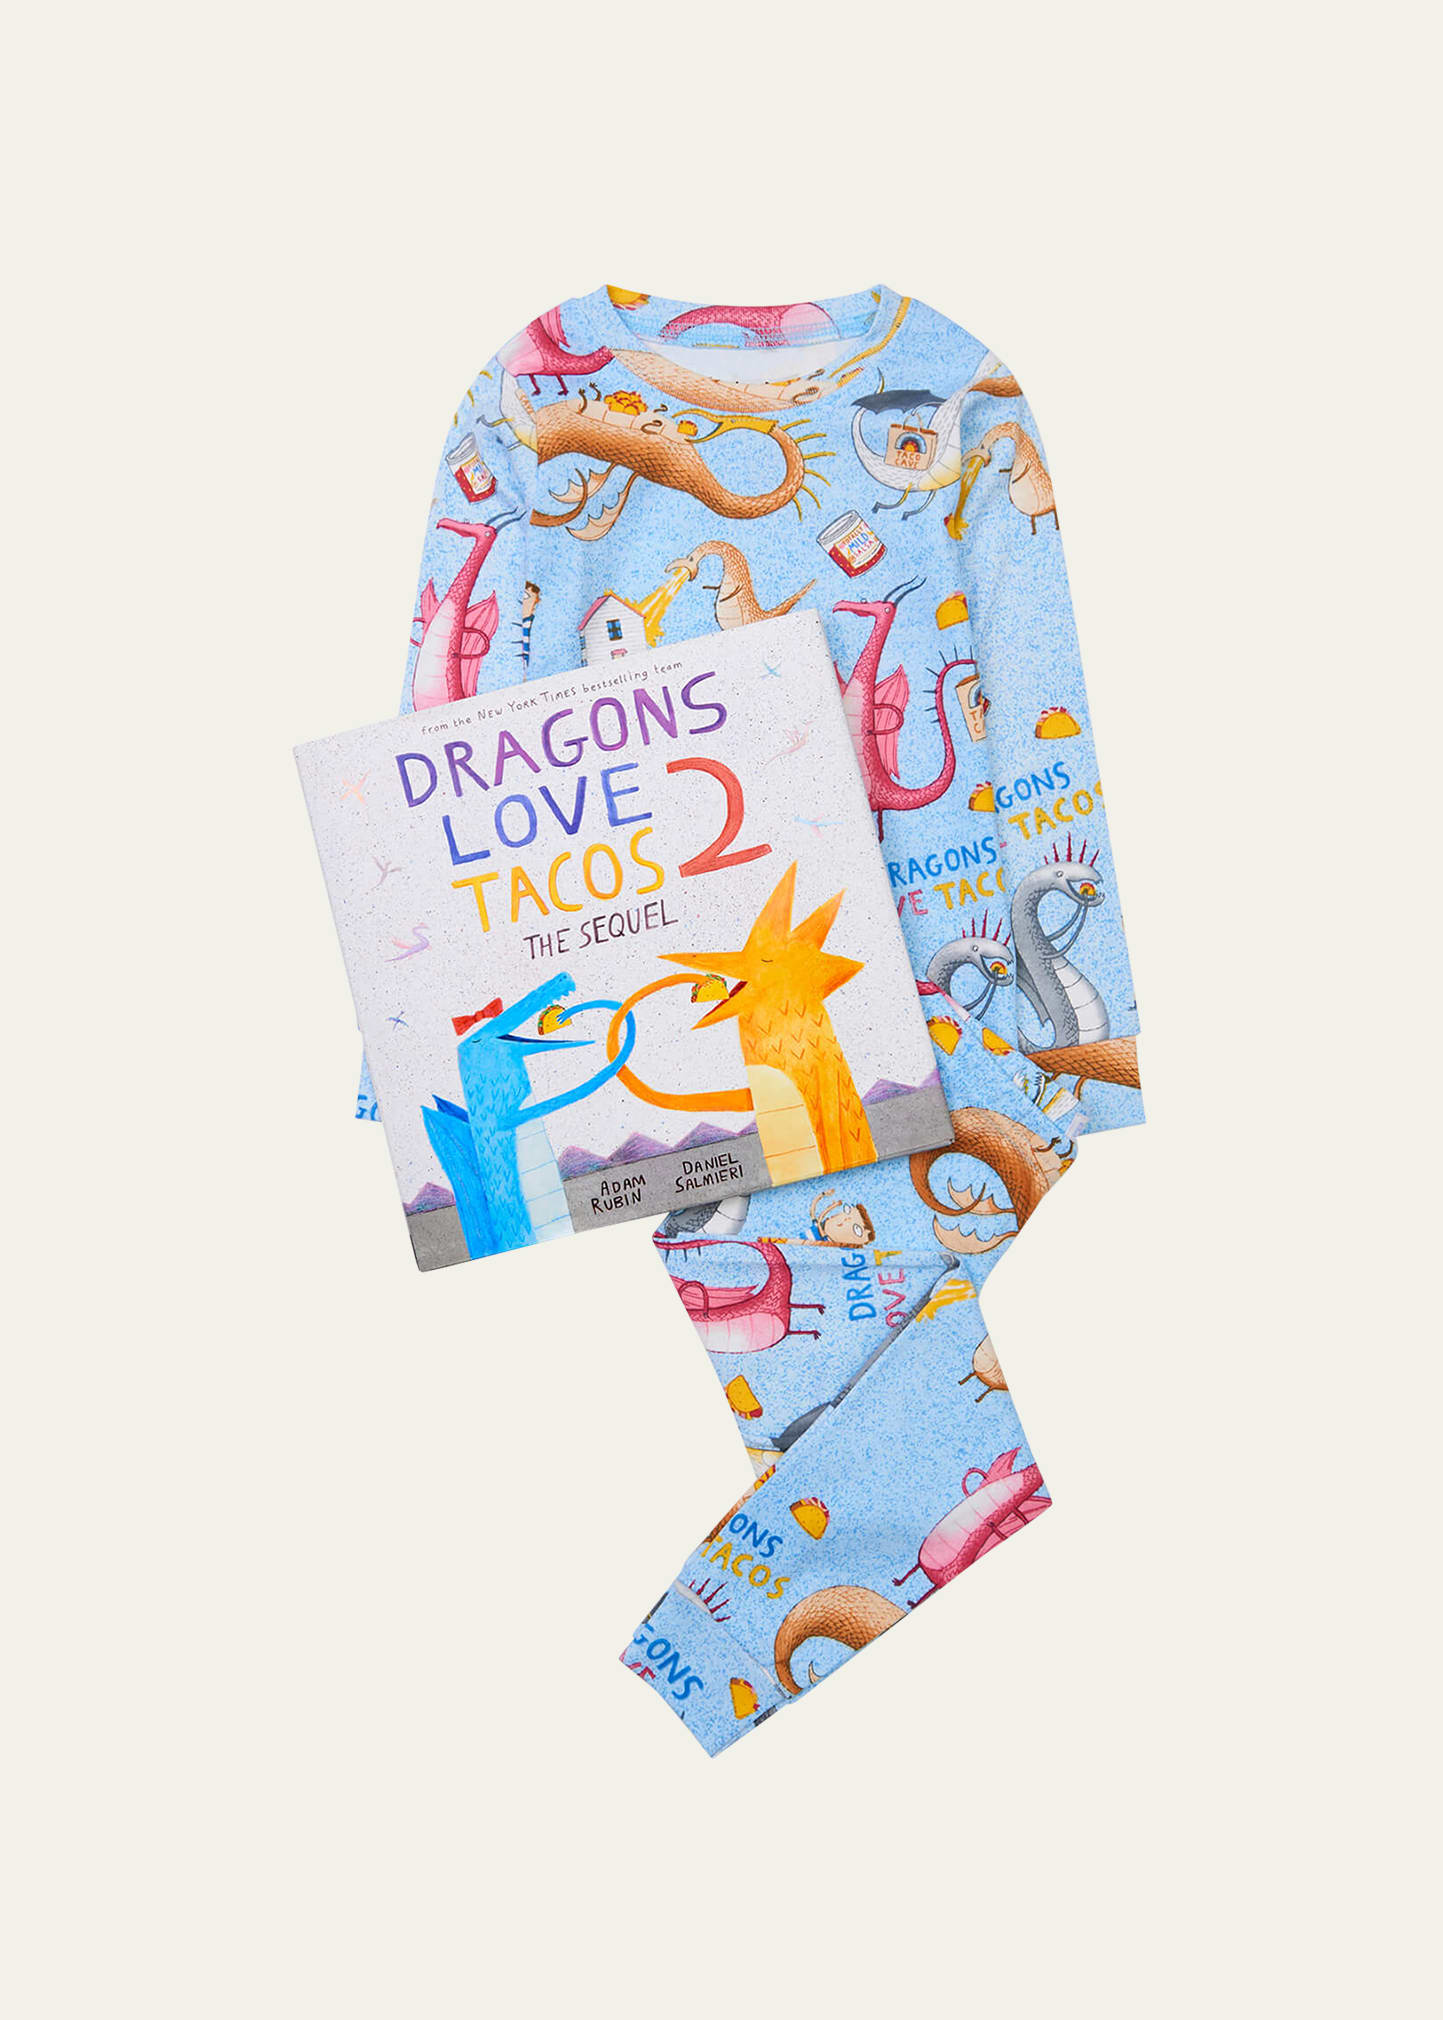 Books To Bed Boy's Dragons Loves Tacos Pajama Book Set, Size 2-7